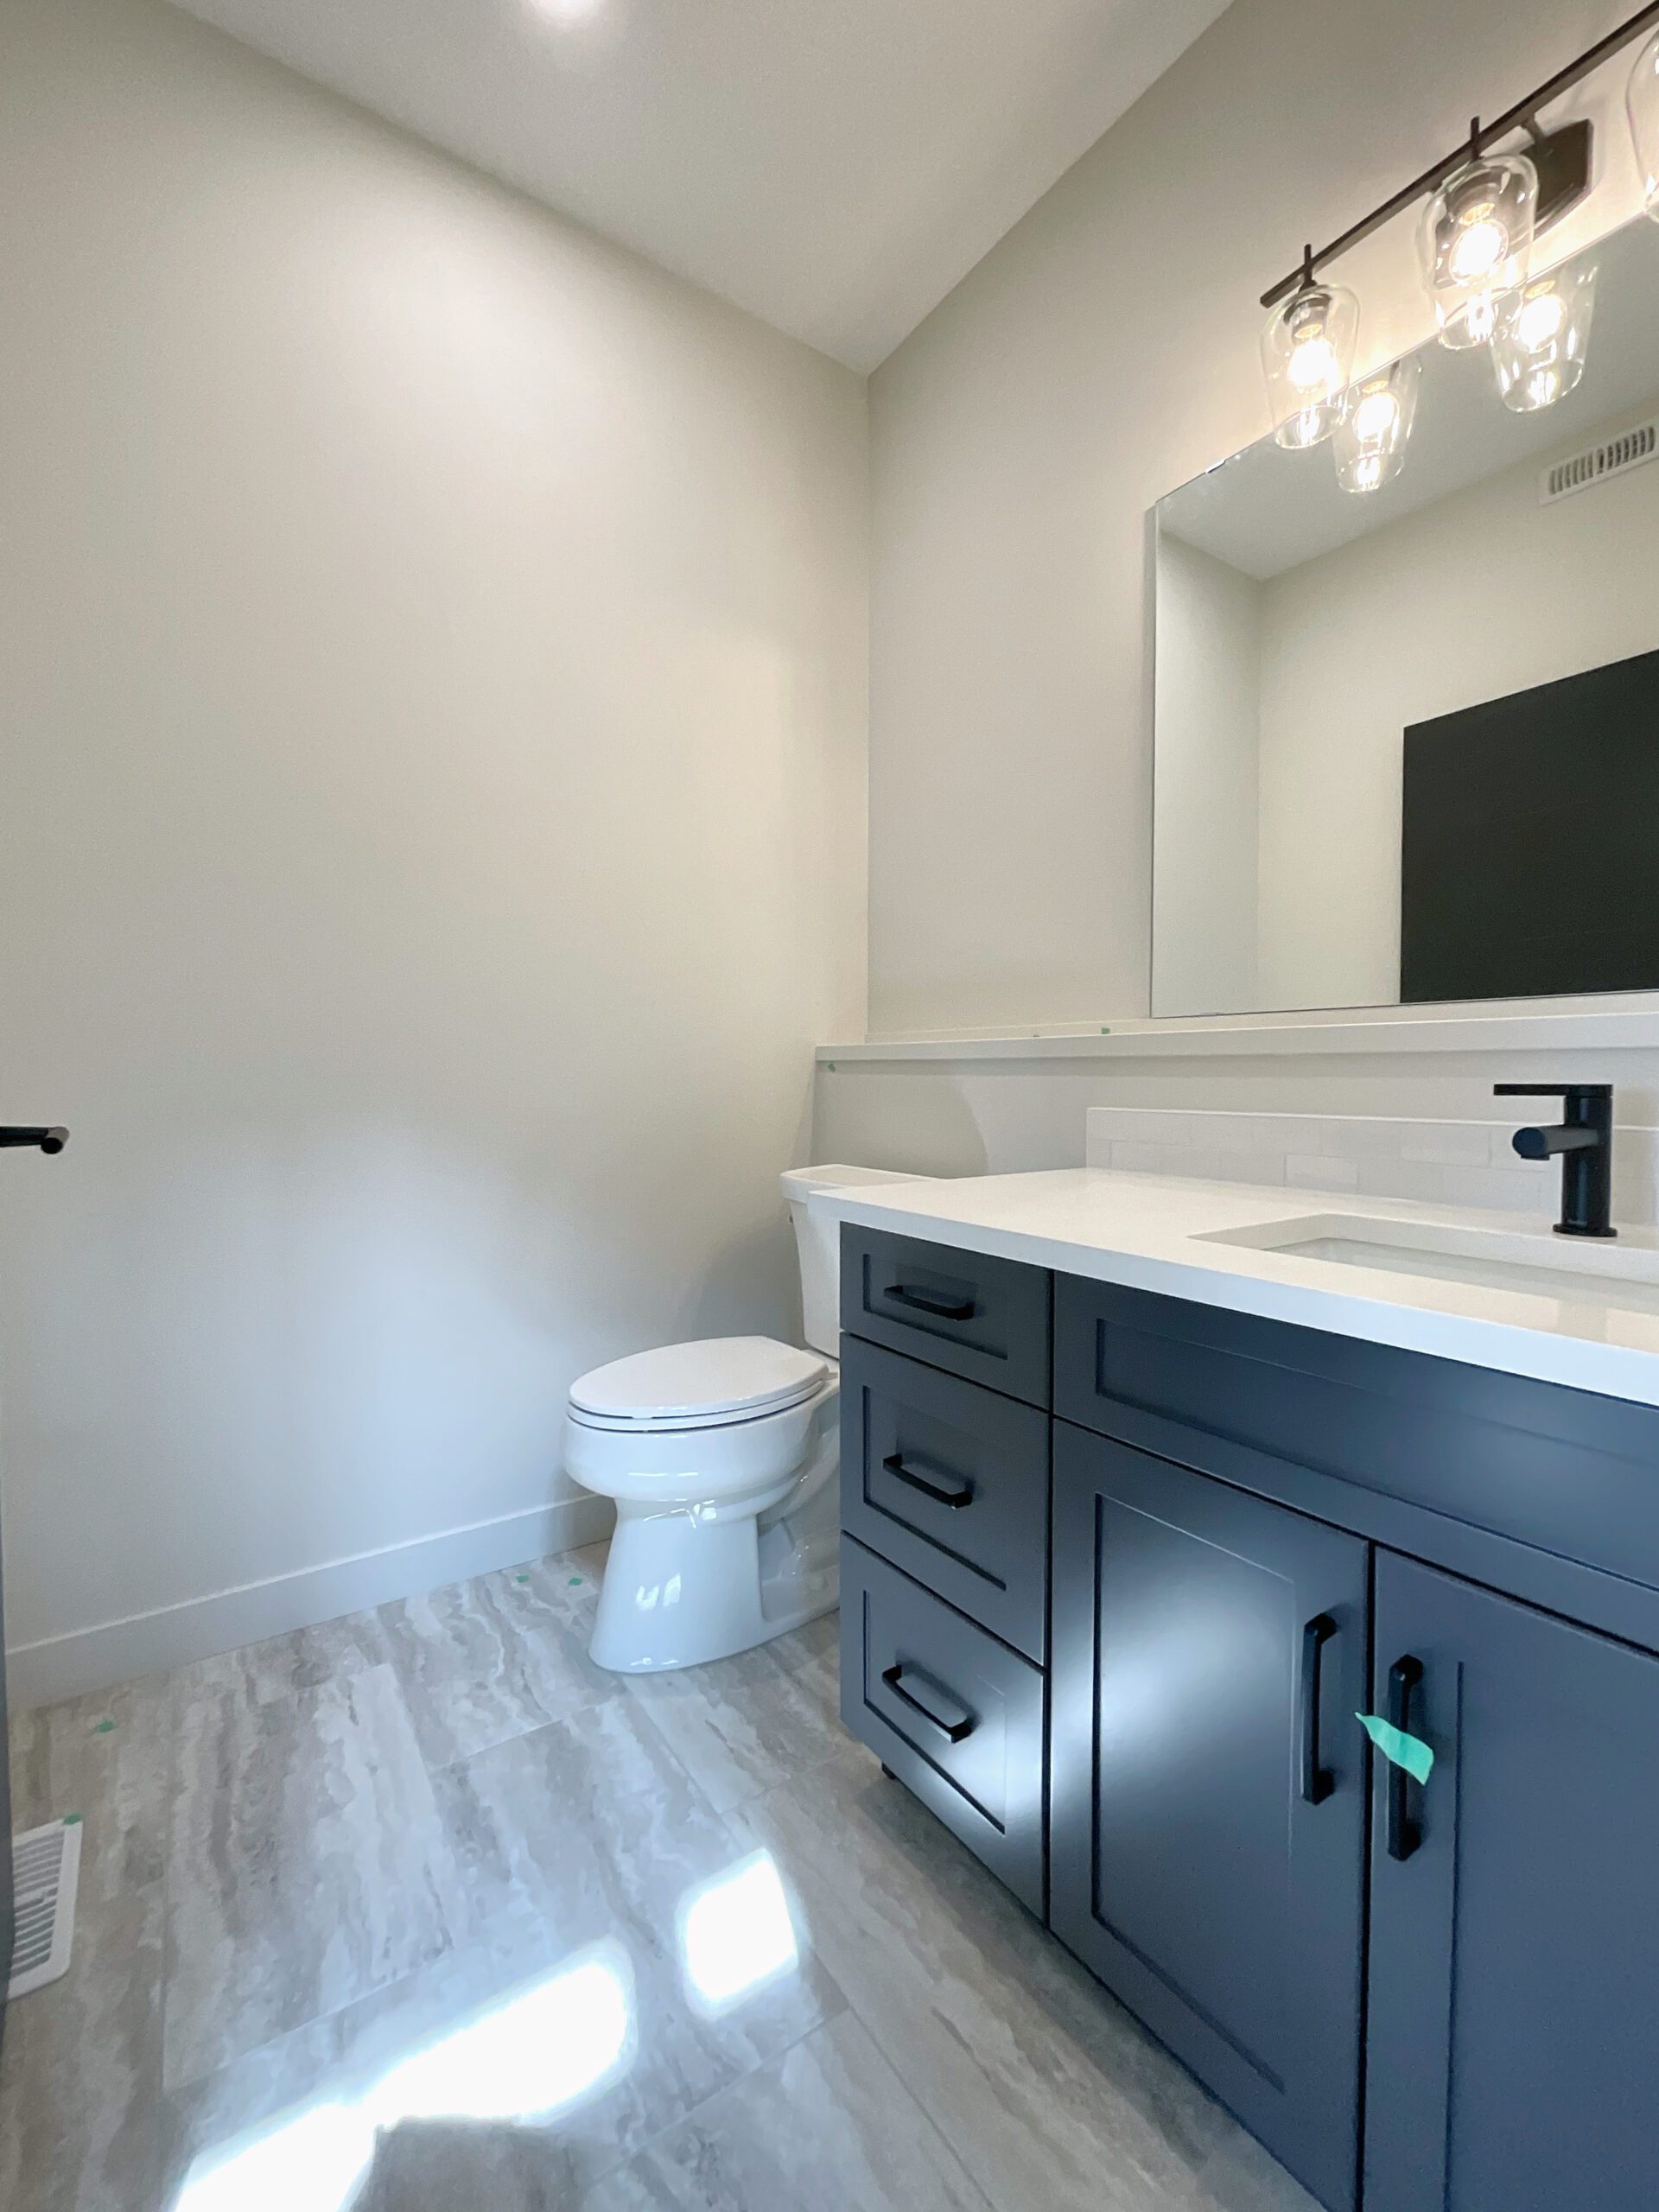 A main floor powder room with white toilet sitting next to a bathroom sink.